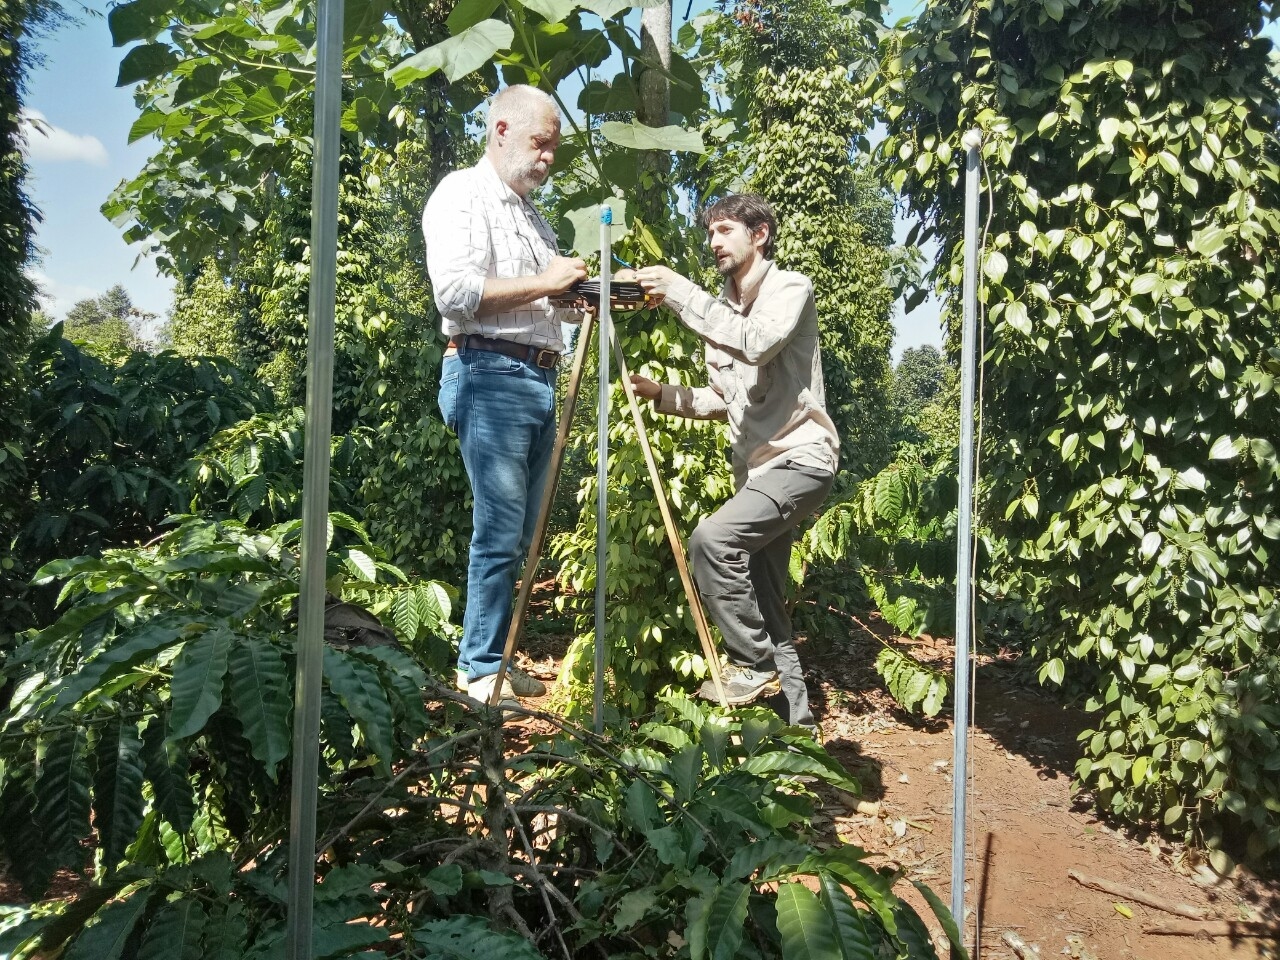 Philippe Girard (left) and Clément Rigal (right), agronomists from CIRAD/ICRAF, established instruments to measure the amount of water required to grow coffee intercropped with pepper. Photo: Chau Long, WASI